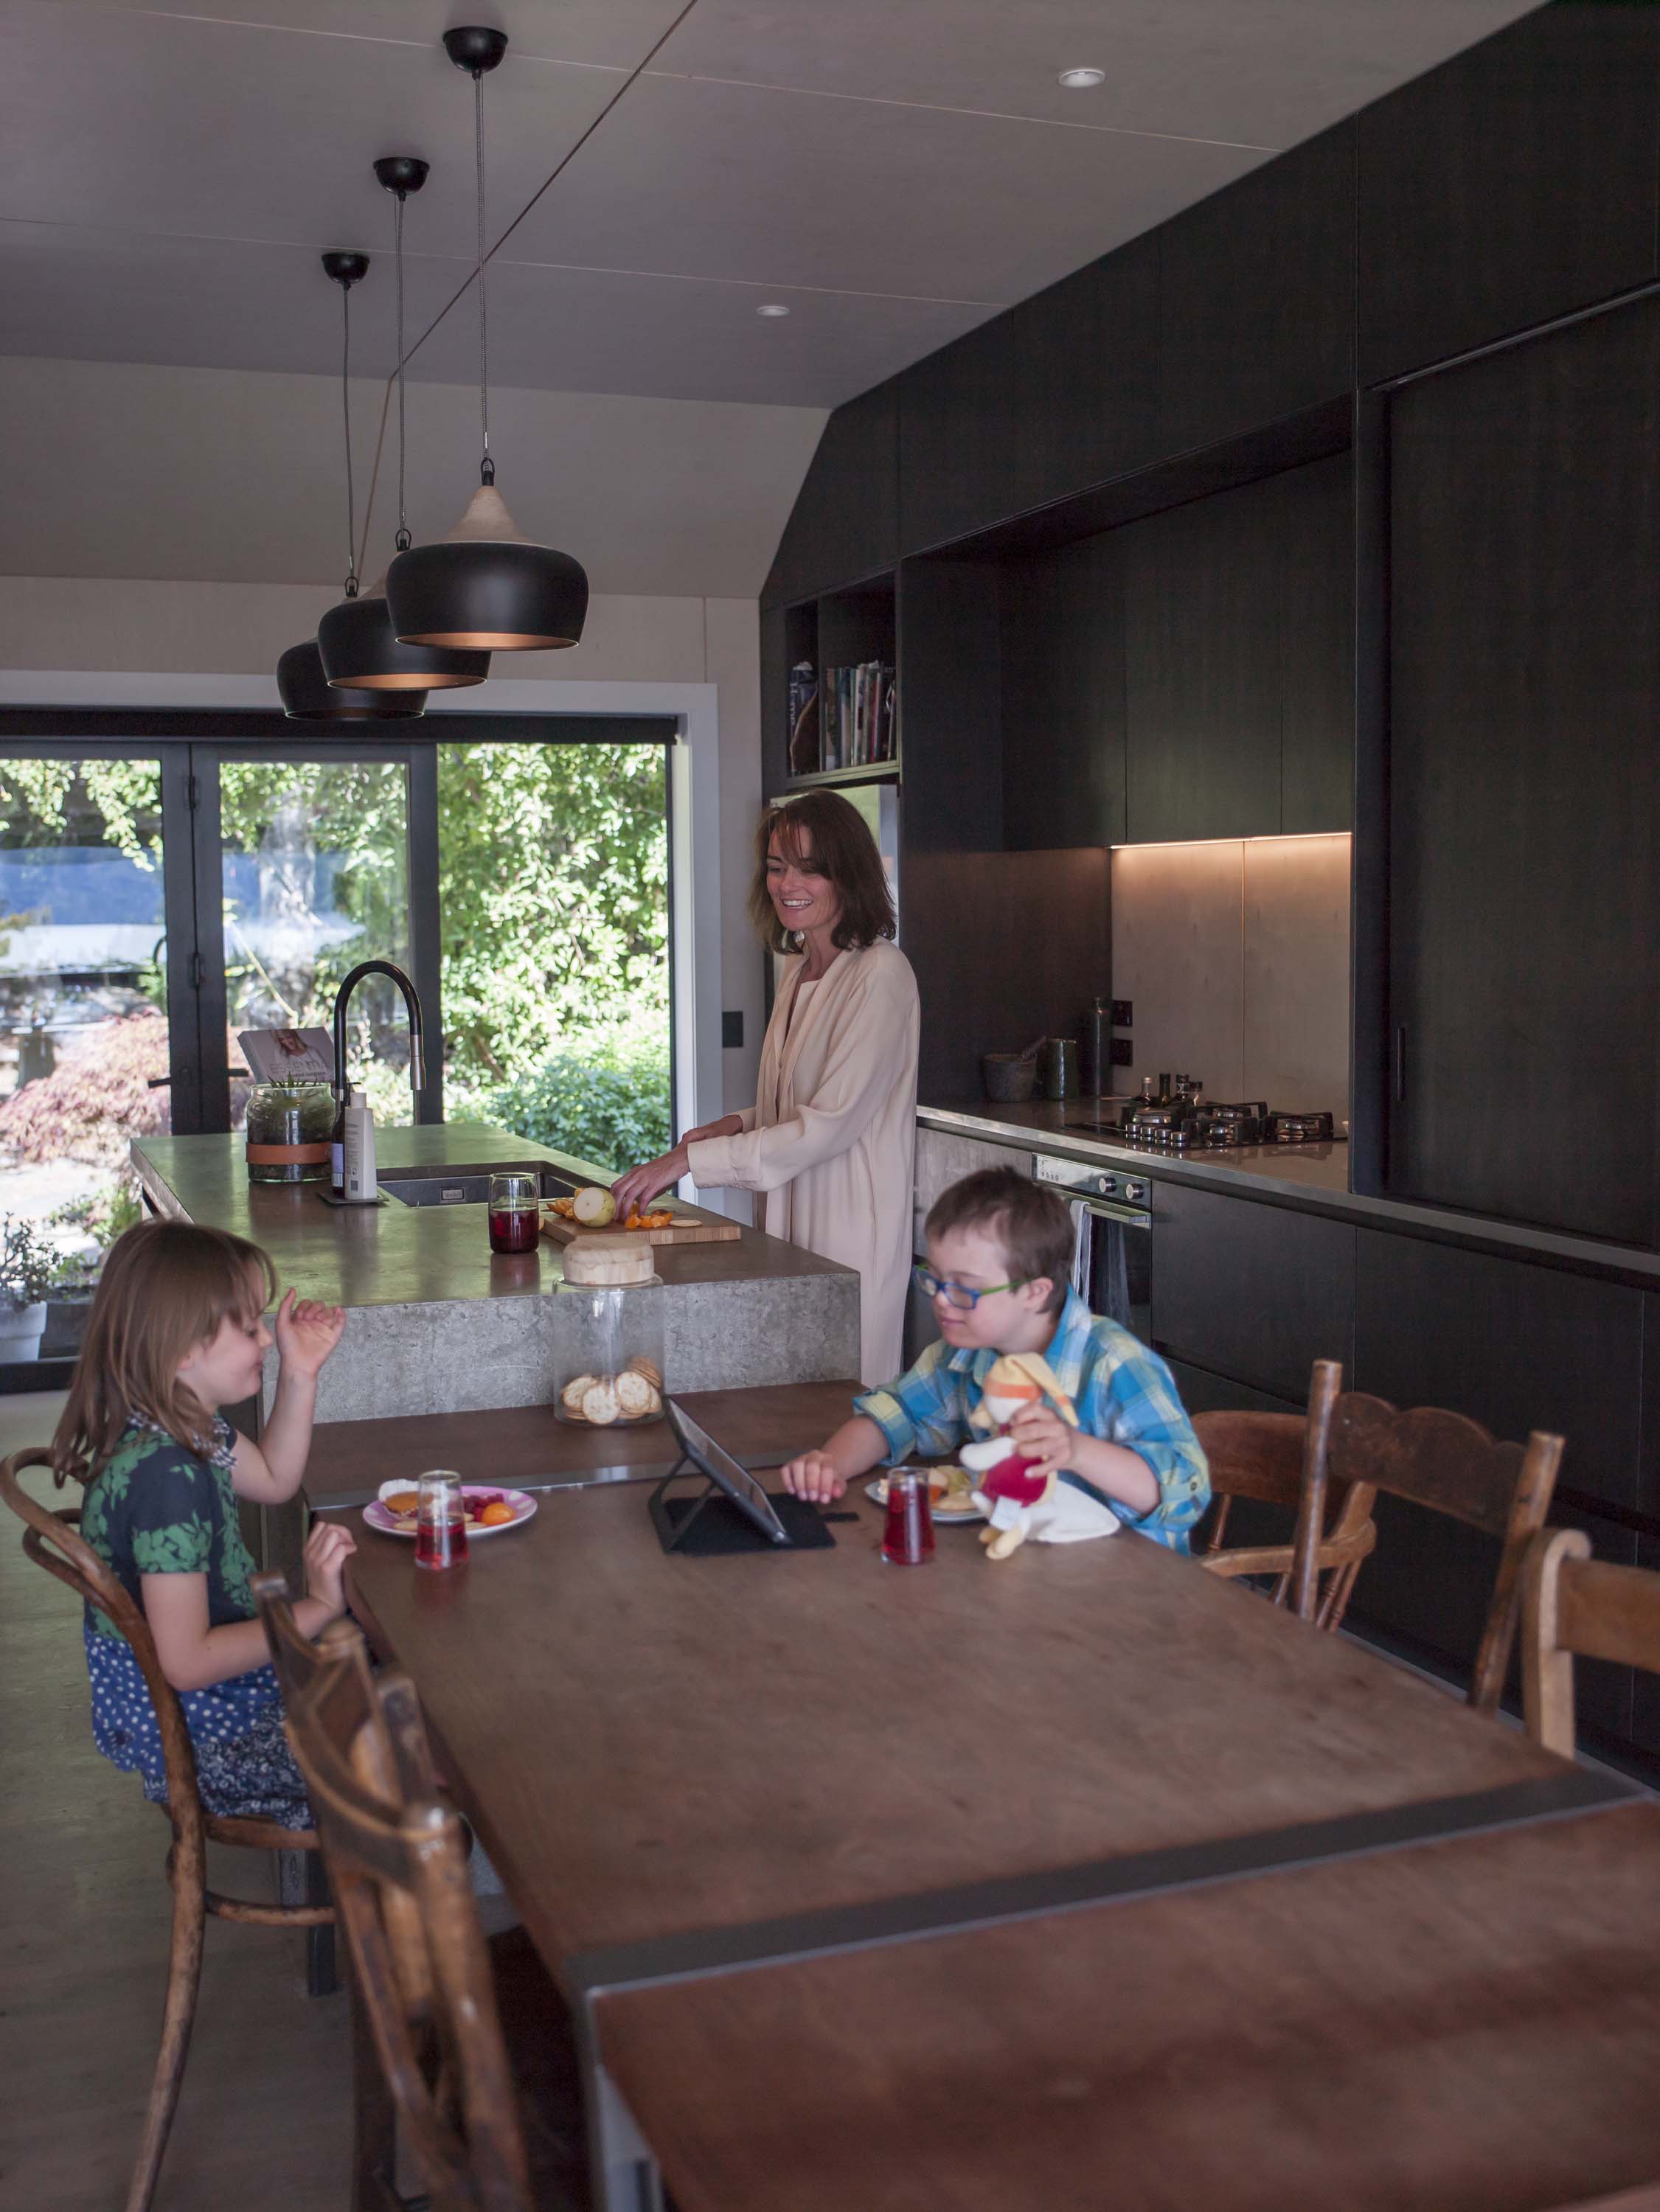 5 Things to Think About Before Building a Breakfast Nook